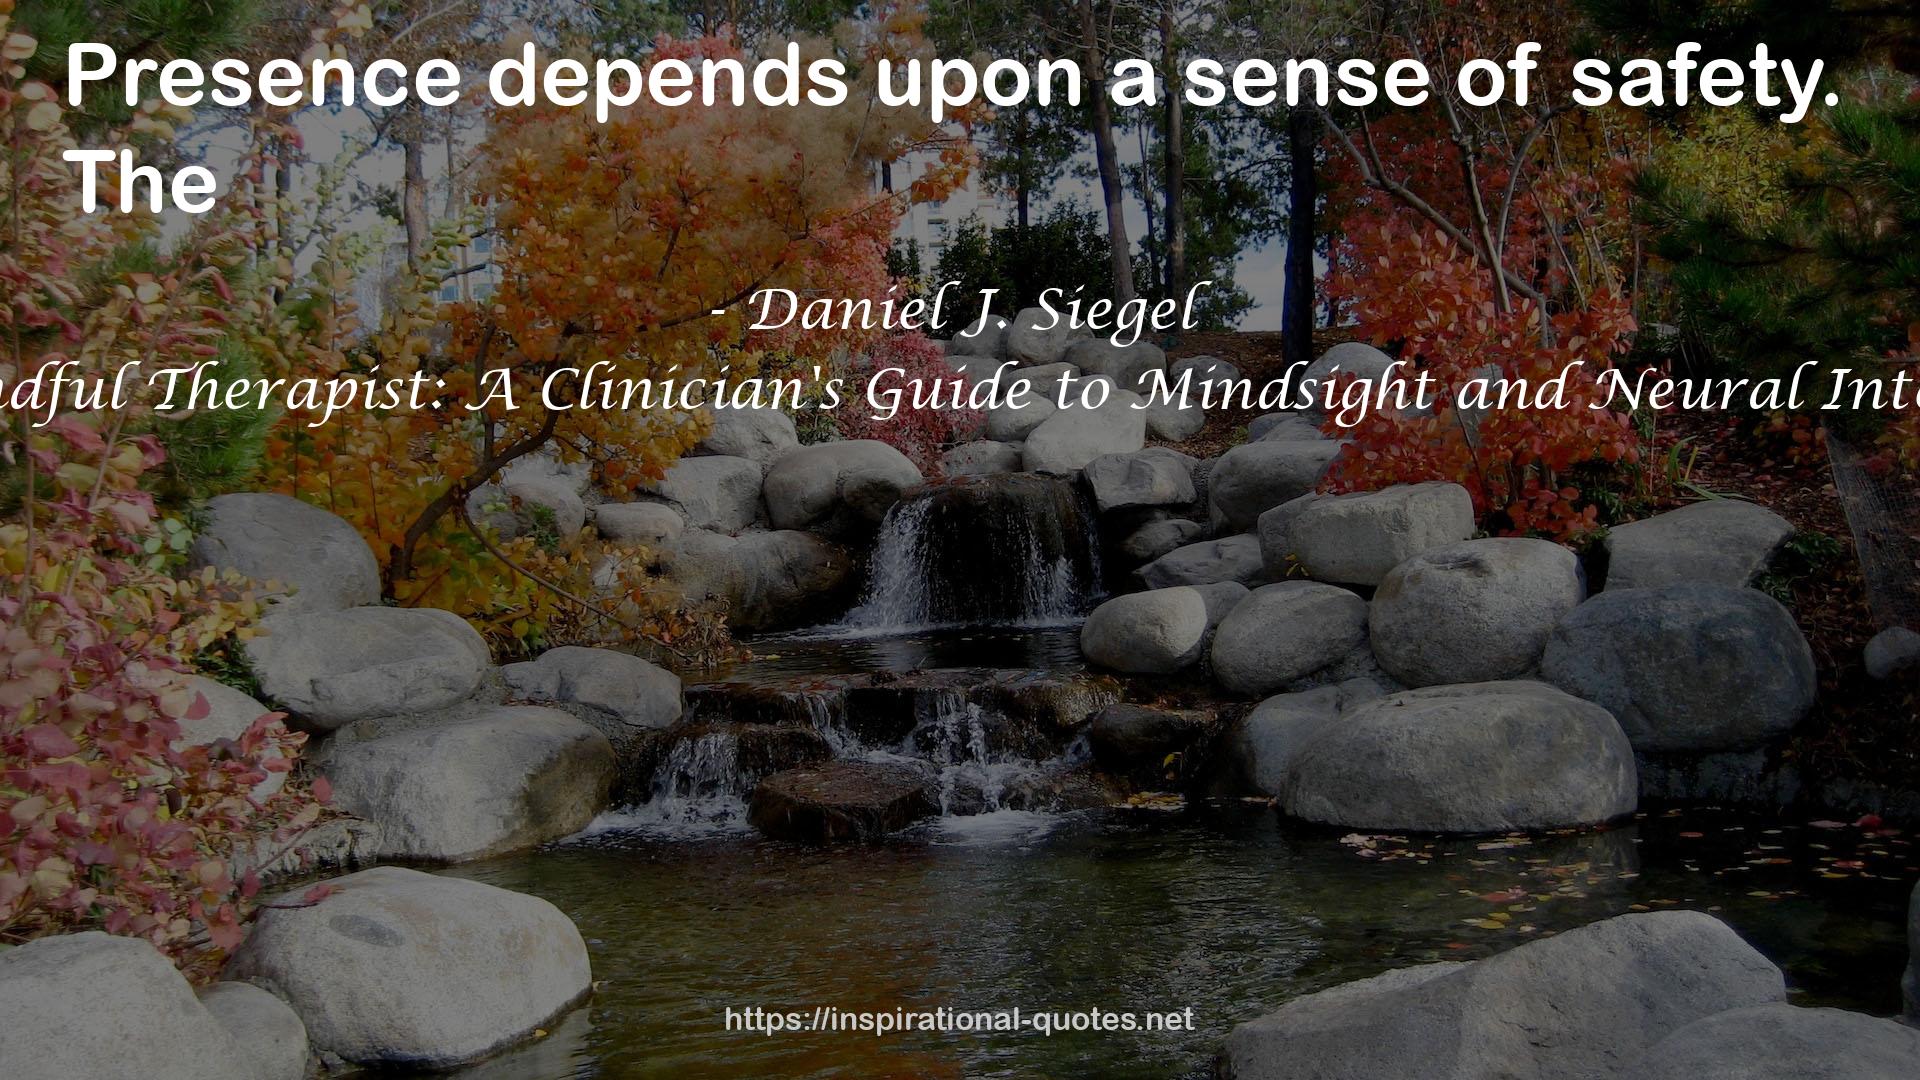 The Mindful Therapist: A Clinician's Guide to Mindsight and Neural Integration QUOTES